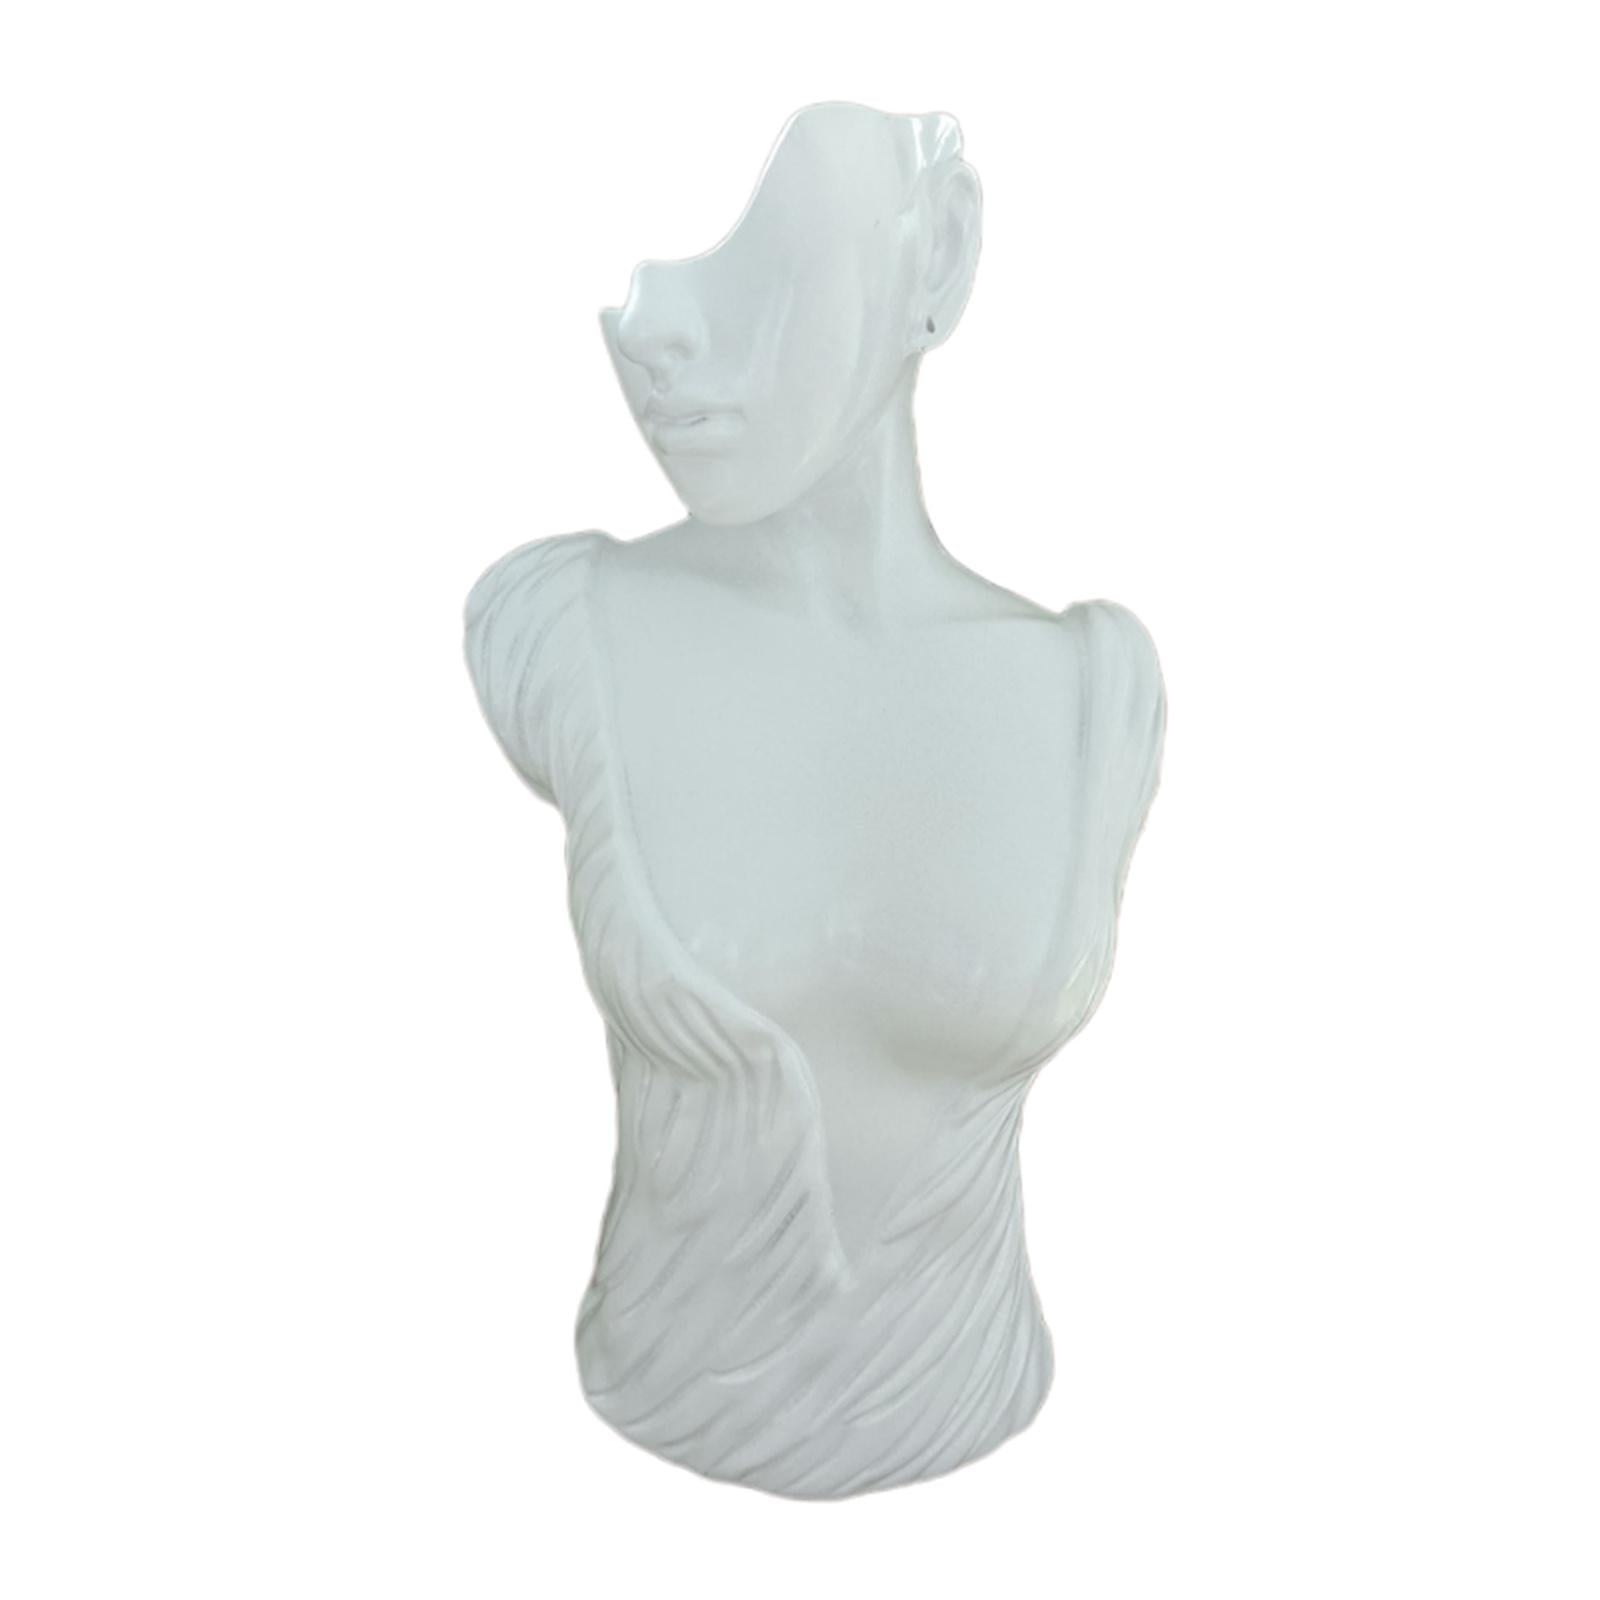 Resin Mannequin Necklace Earring Display Head Bust Jewelry Stand Holder Rack Hot 